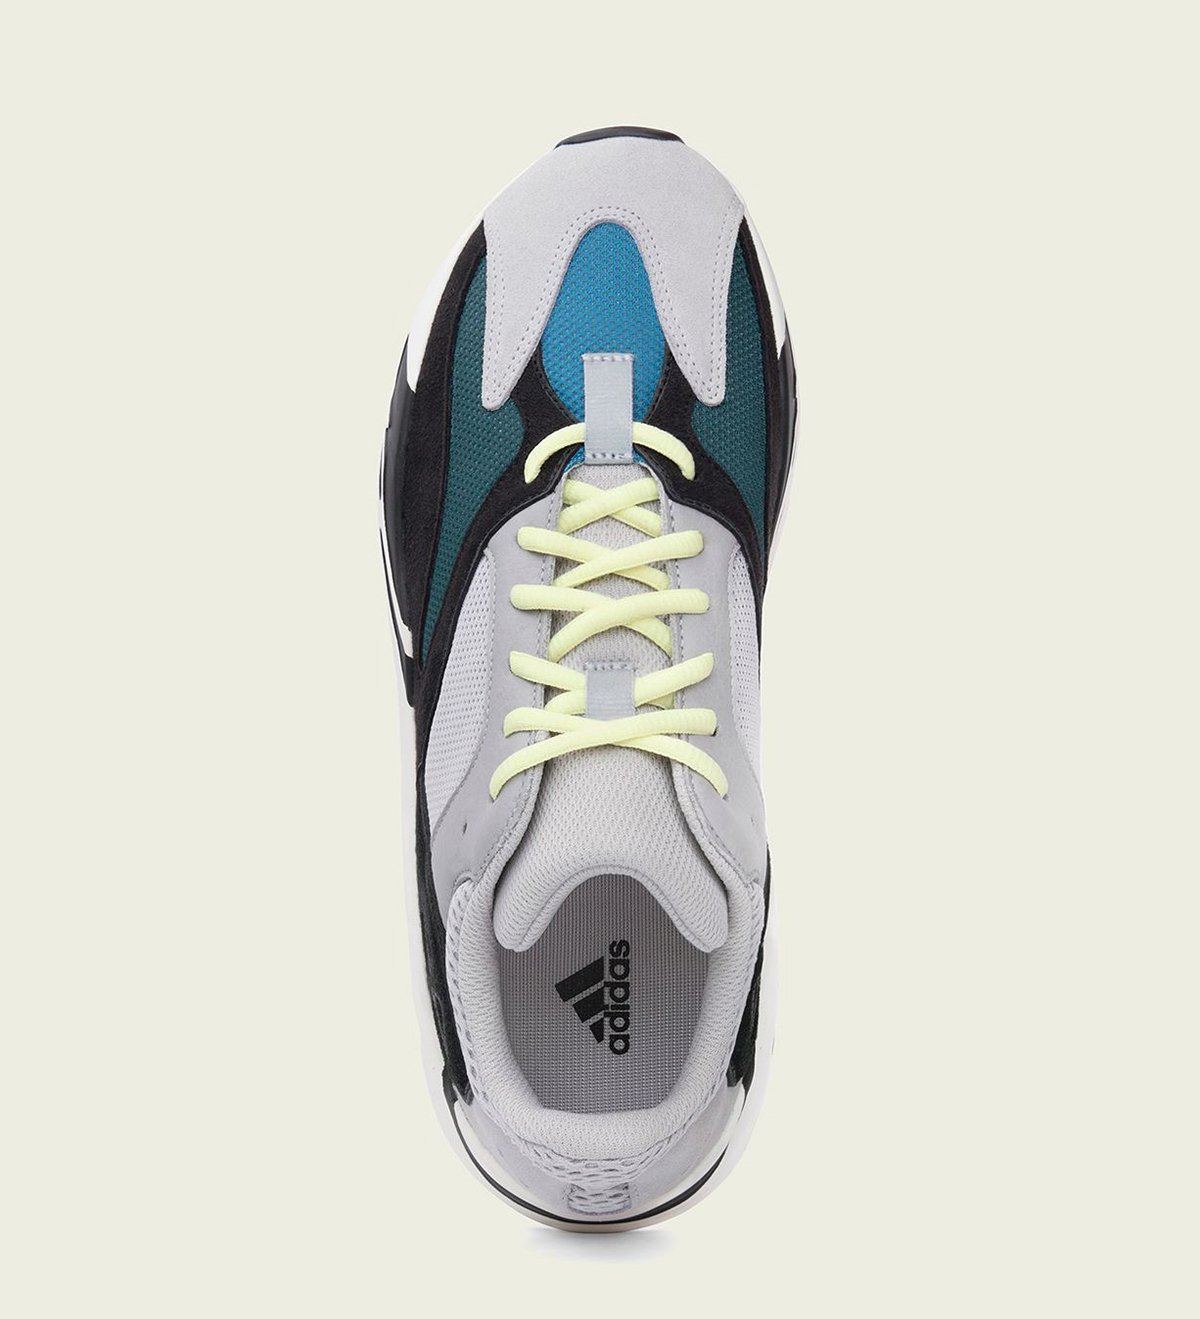 Yes — The YEEZY BOOST 700 “Wave Runner 